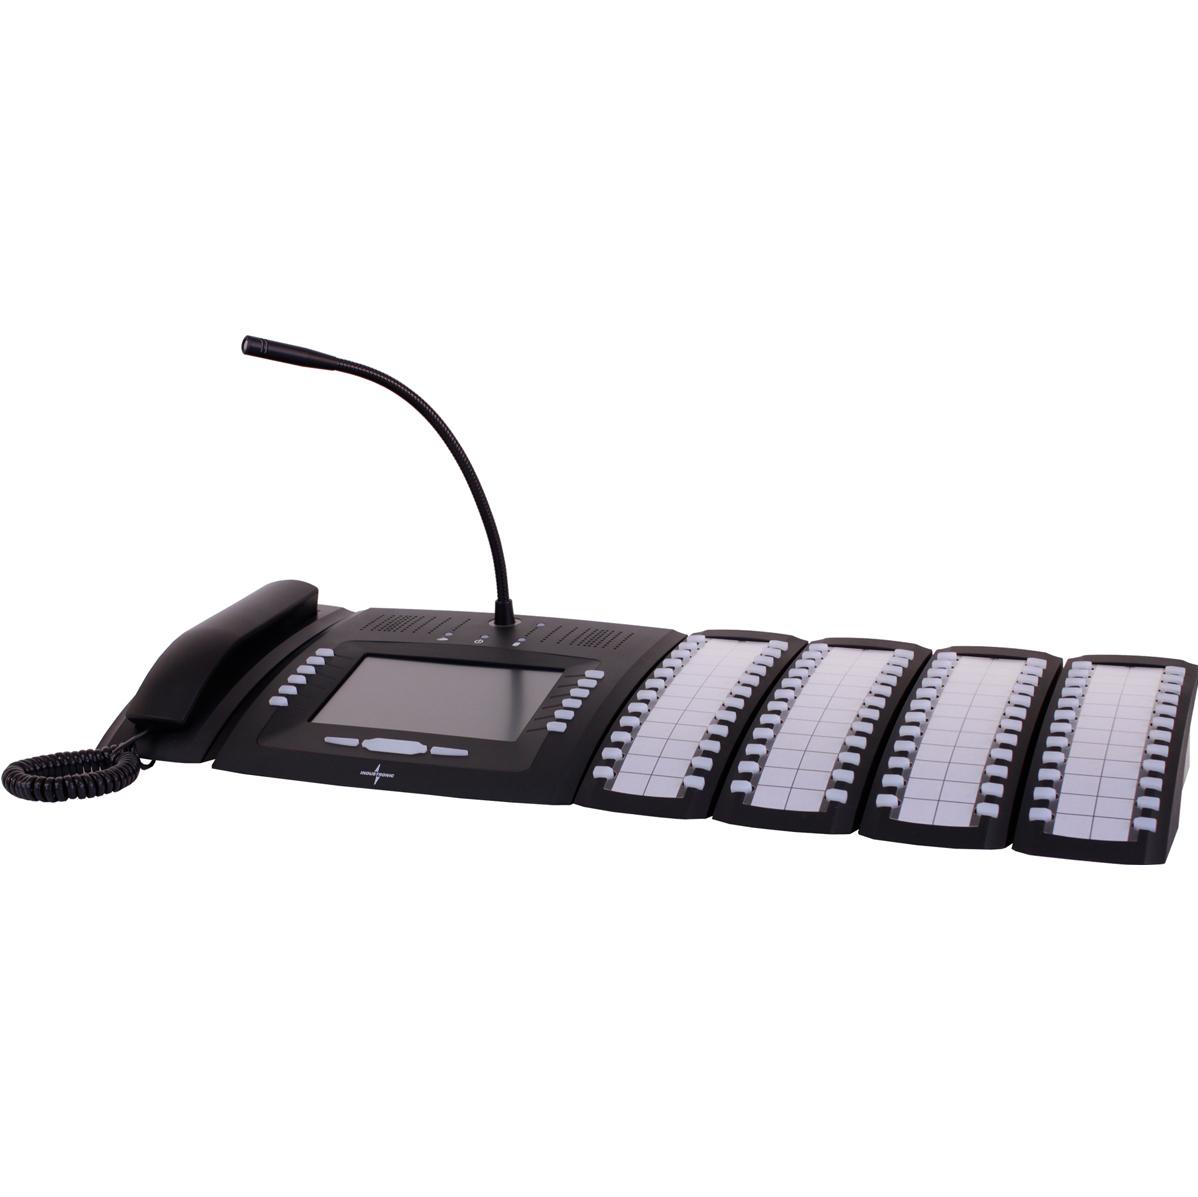 IP desktop intercom station with gooseneck microphone, color touch display for flexible operation; 12 mechanical keys and 3 function keys